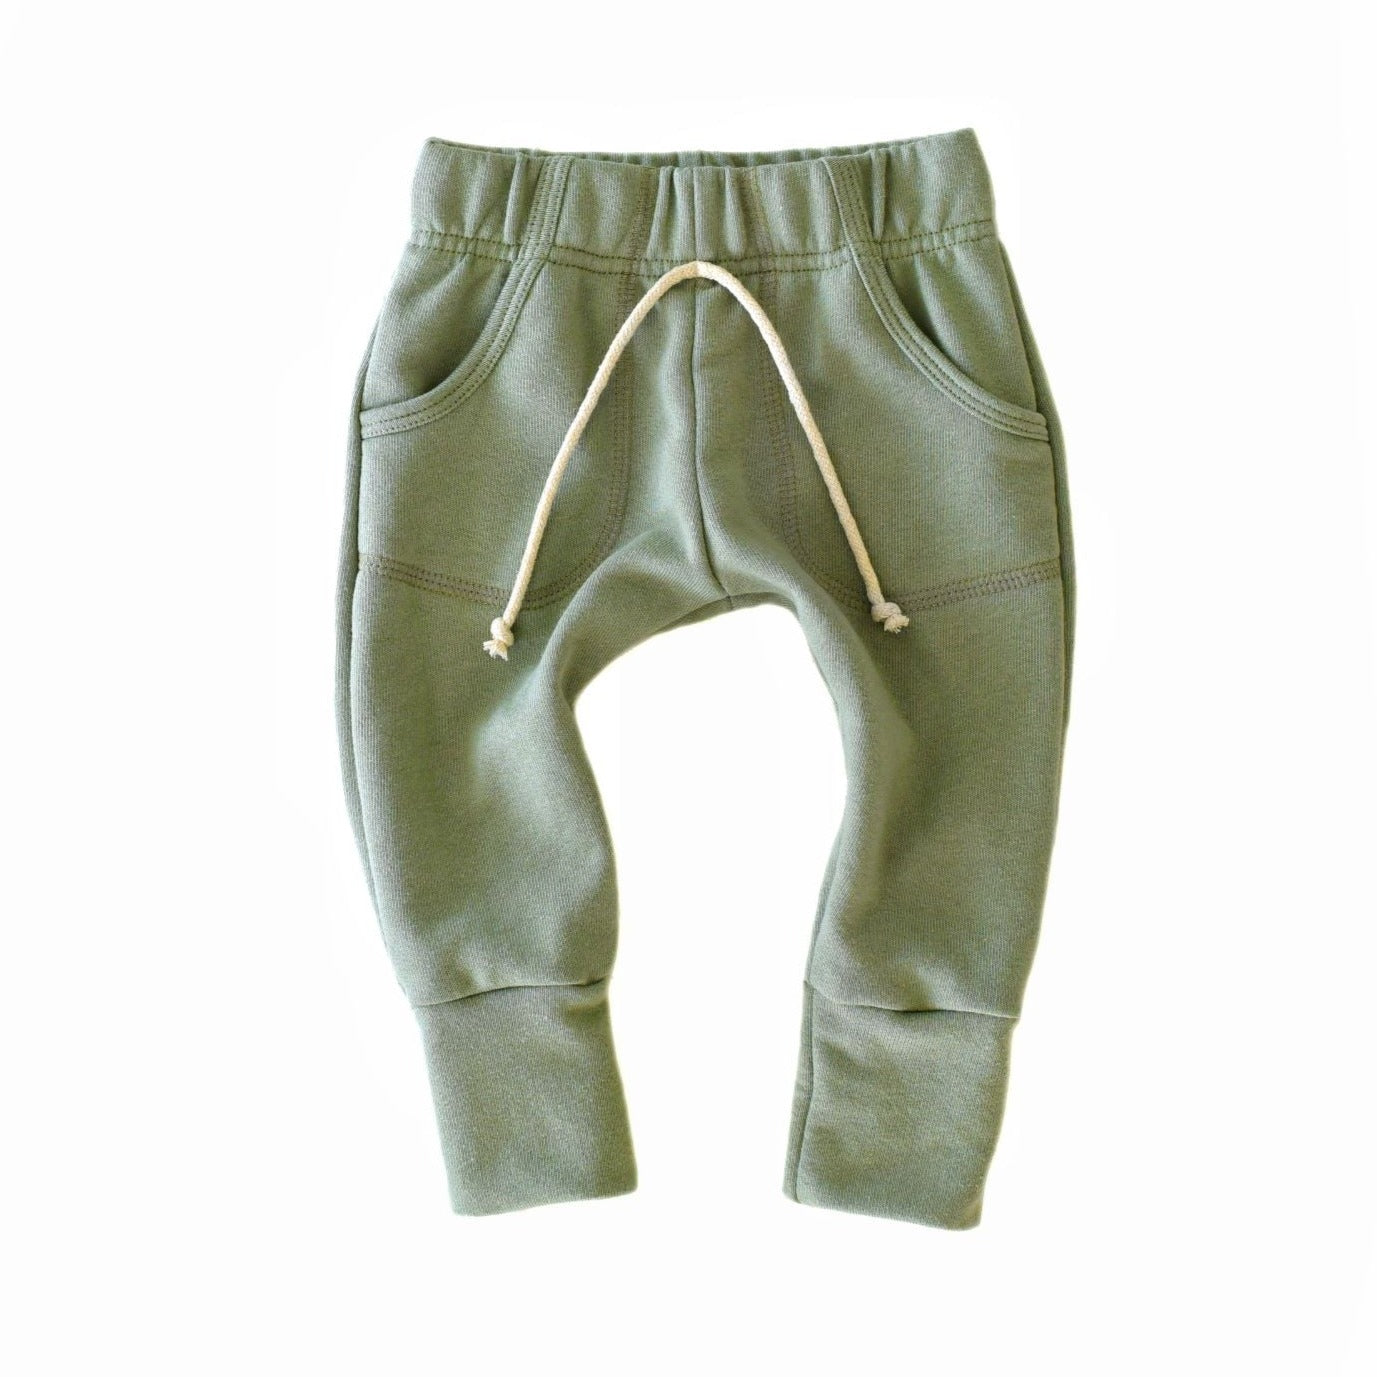 pocket joggers - pale green